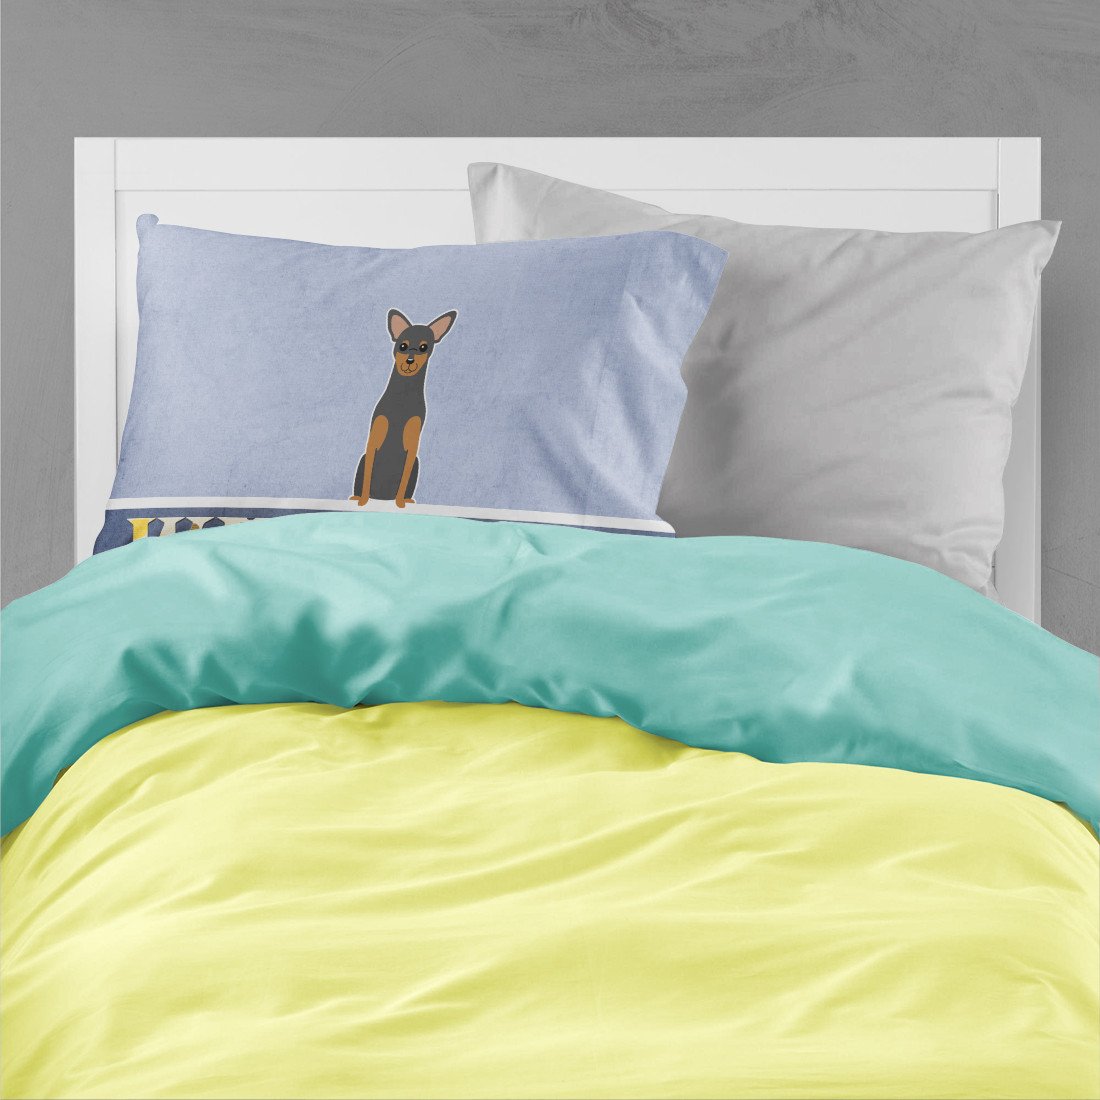 Manchester Terrier Welcome Fabric Standard Pillowcase BB5609PILLOWCASE by Caroline's Treasures